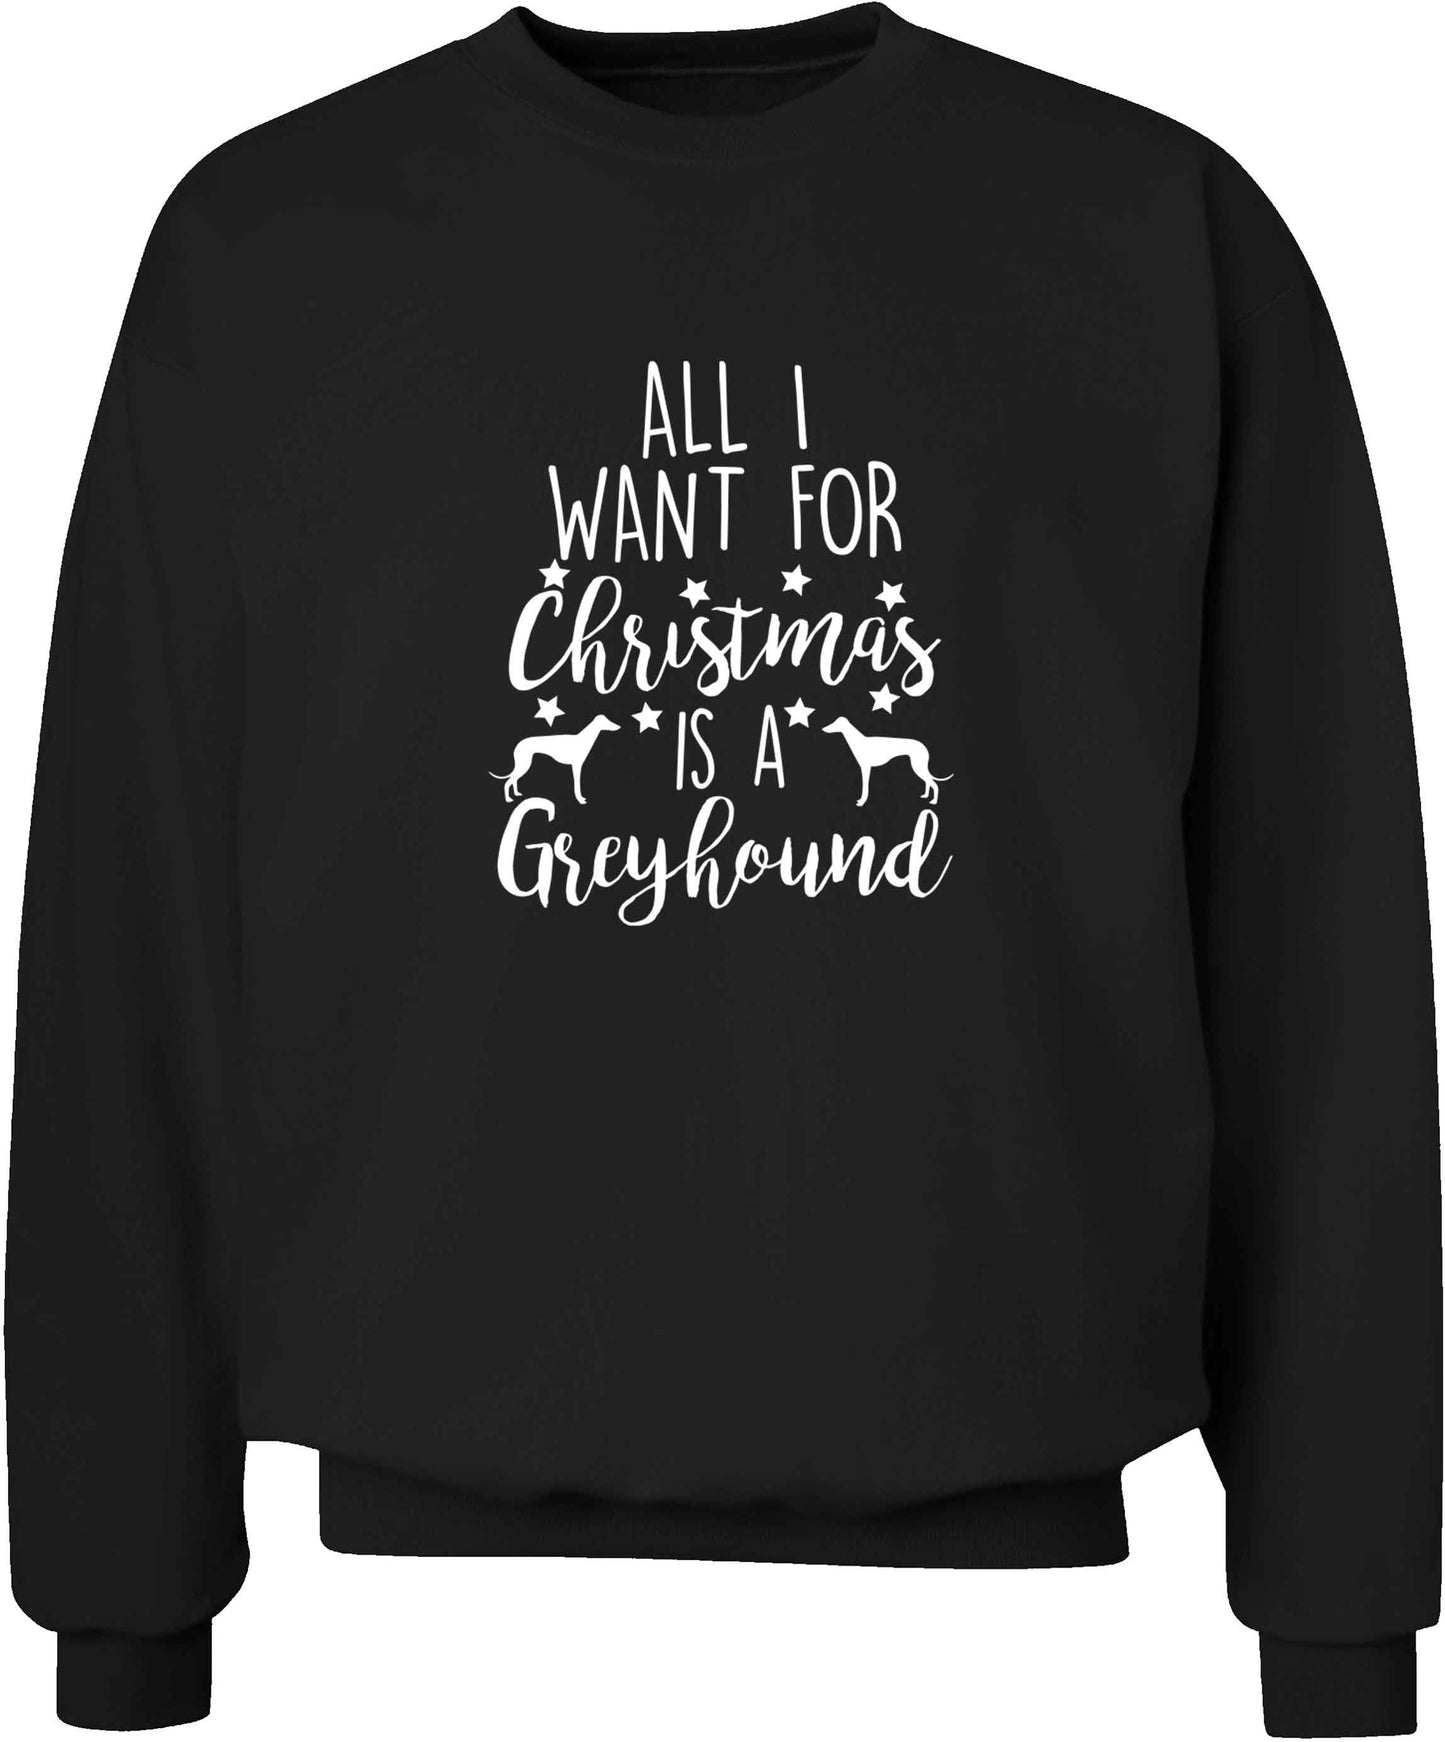 All I want for Christmas is a greyhound adult's unisex black sweater 2XL